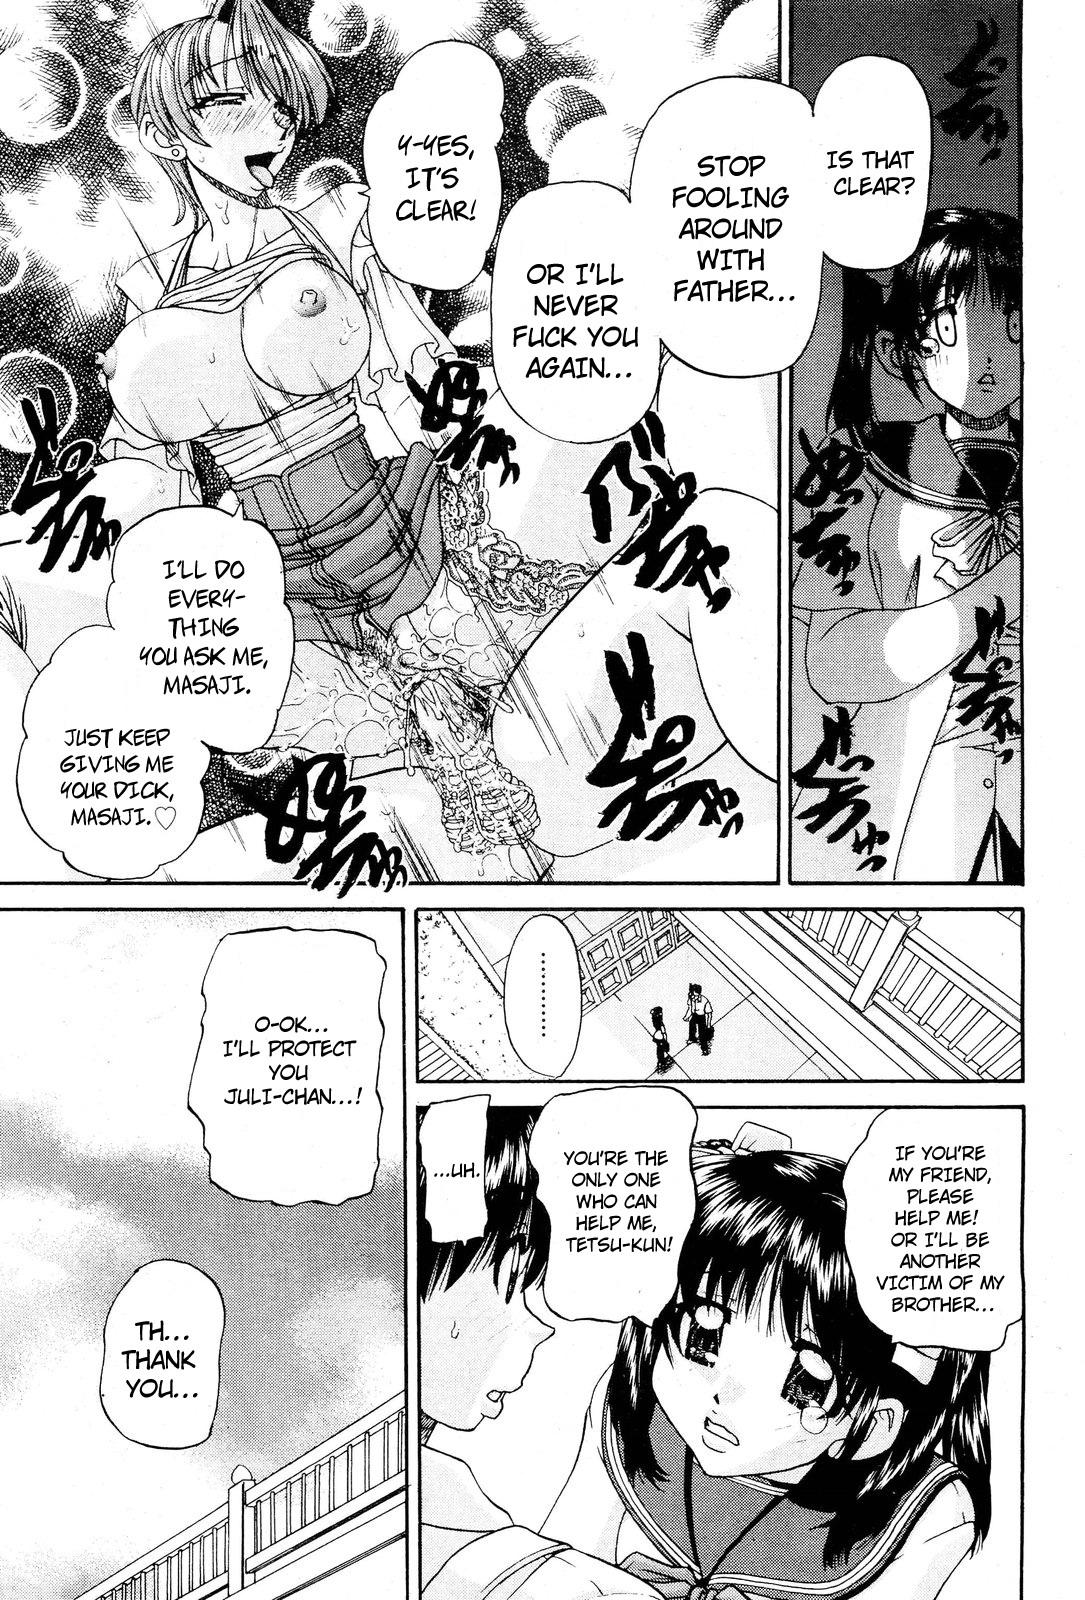 Cheating My Brother is the Worst!! Ch.01-05 + bonus Taiwan - Page 6